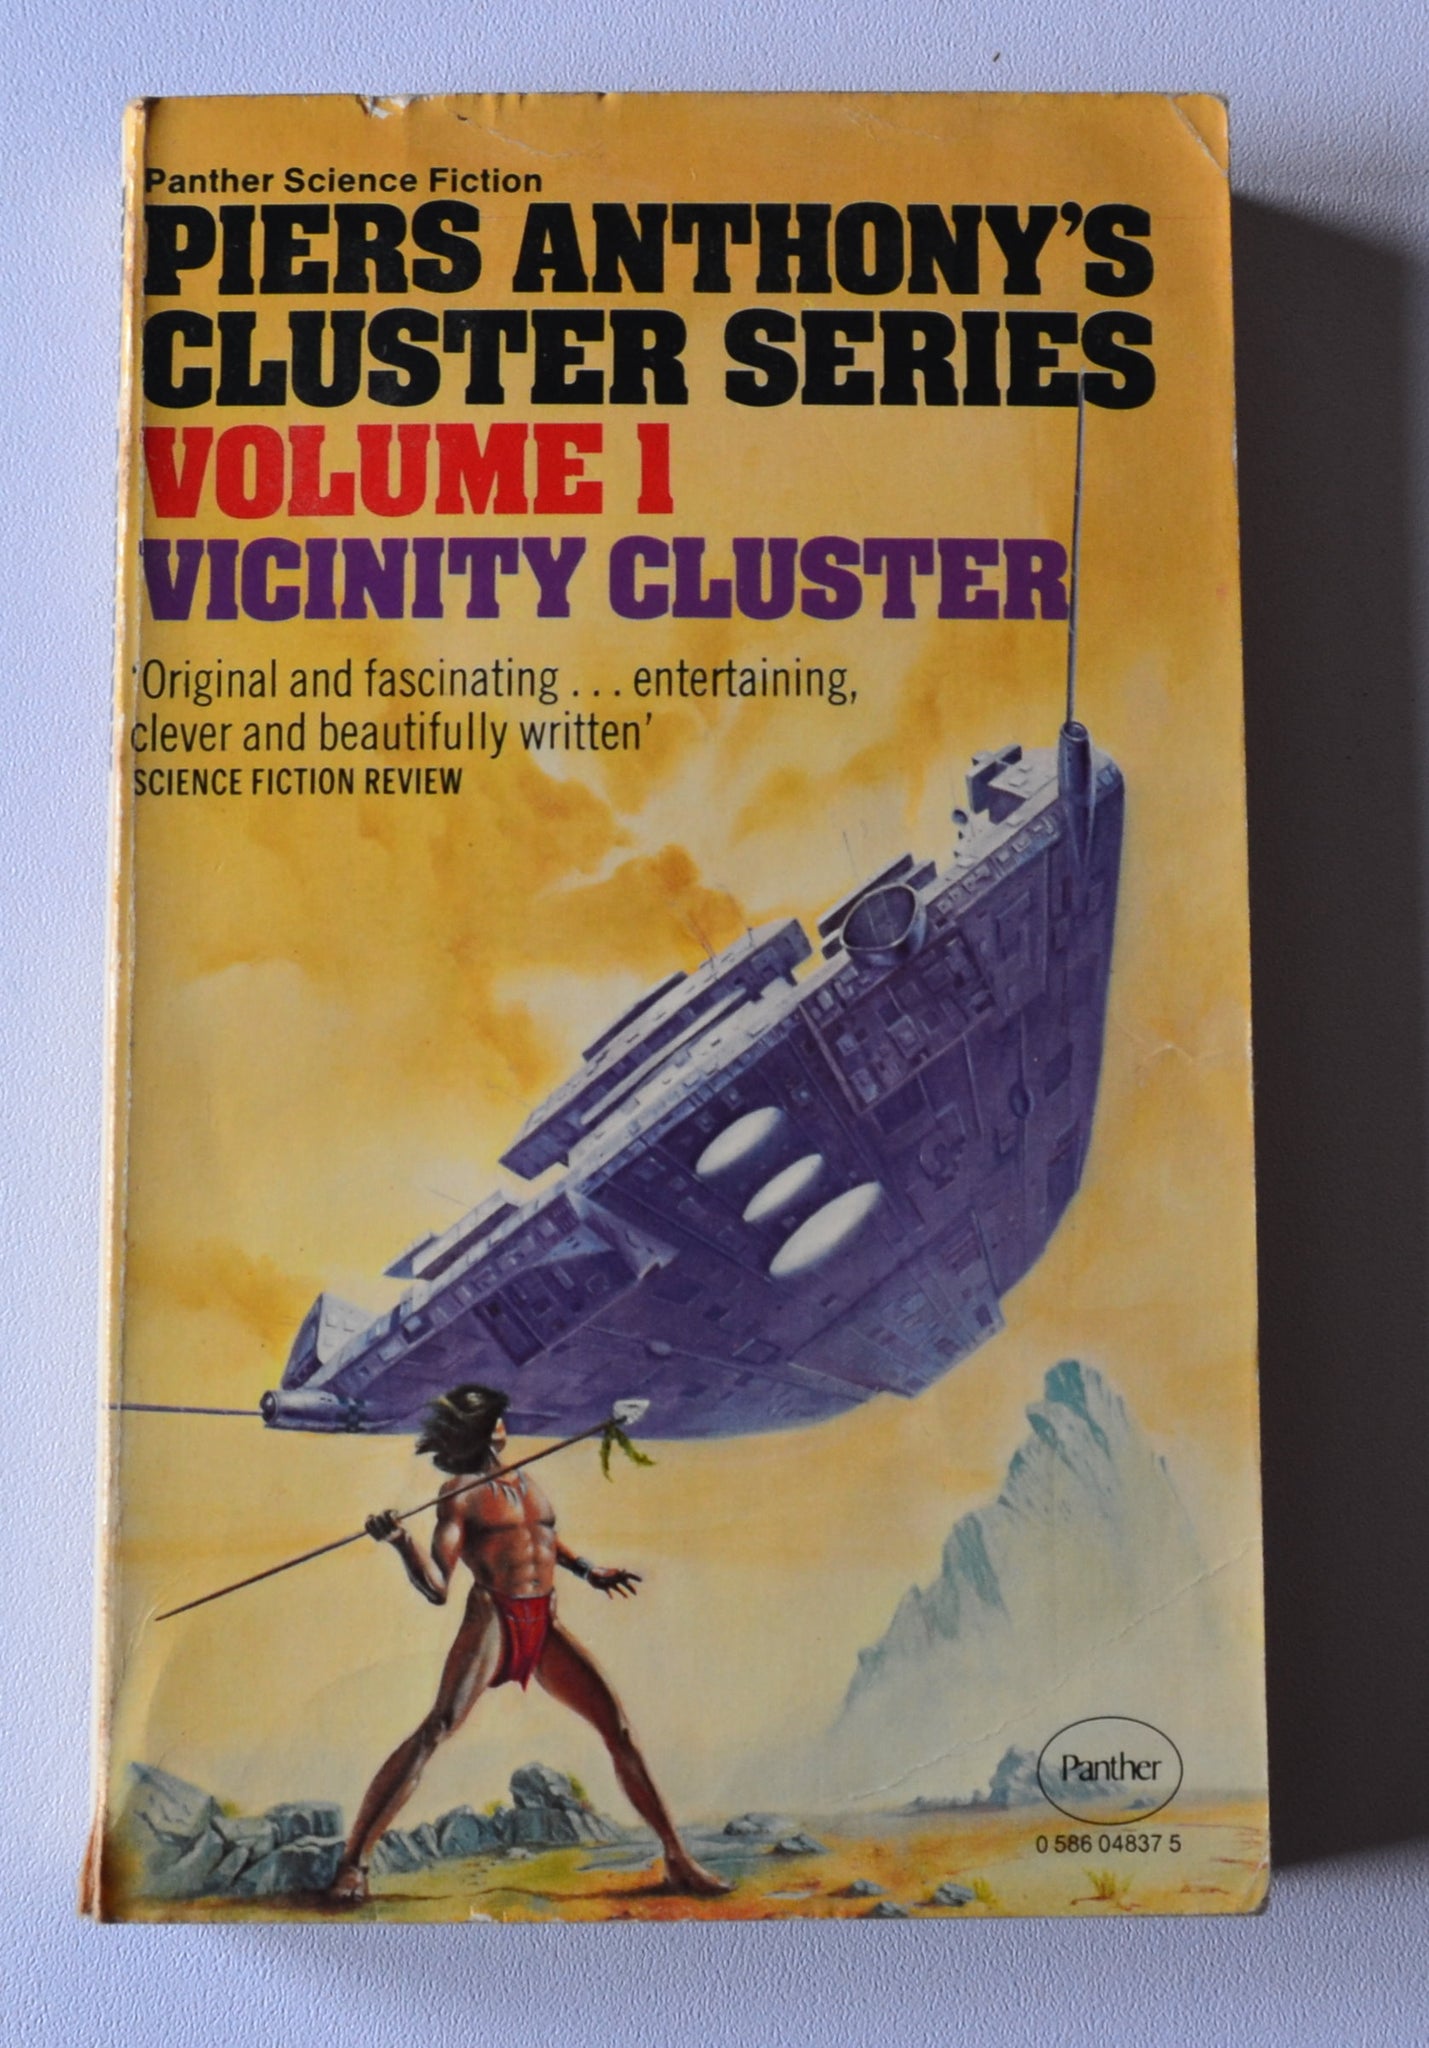 Piers Anthony's Cluster Series Volume 1 - Vicinity Cluster